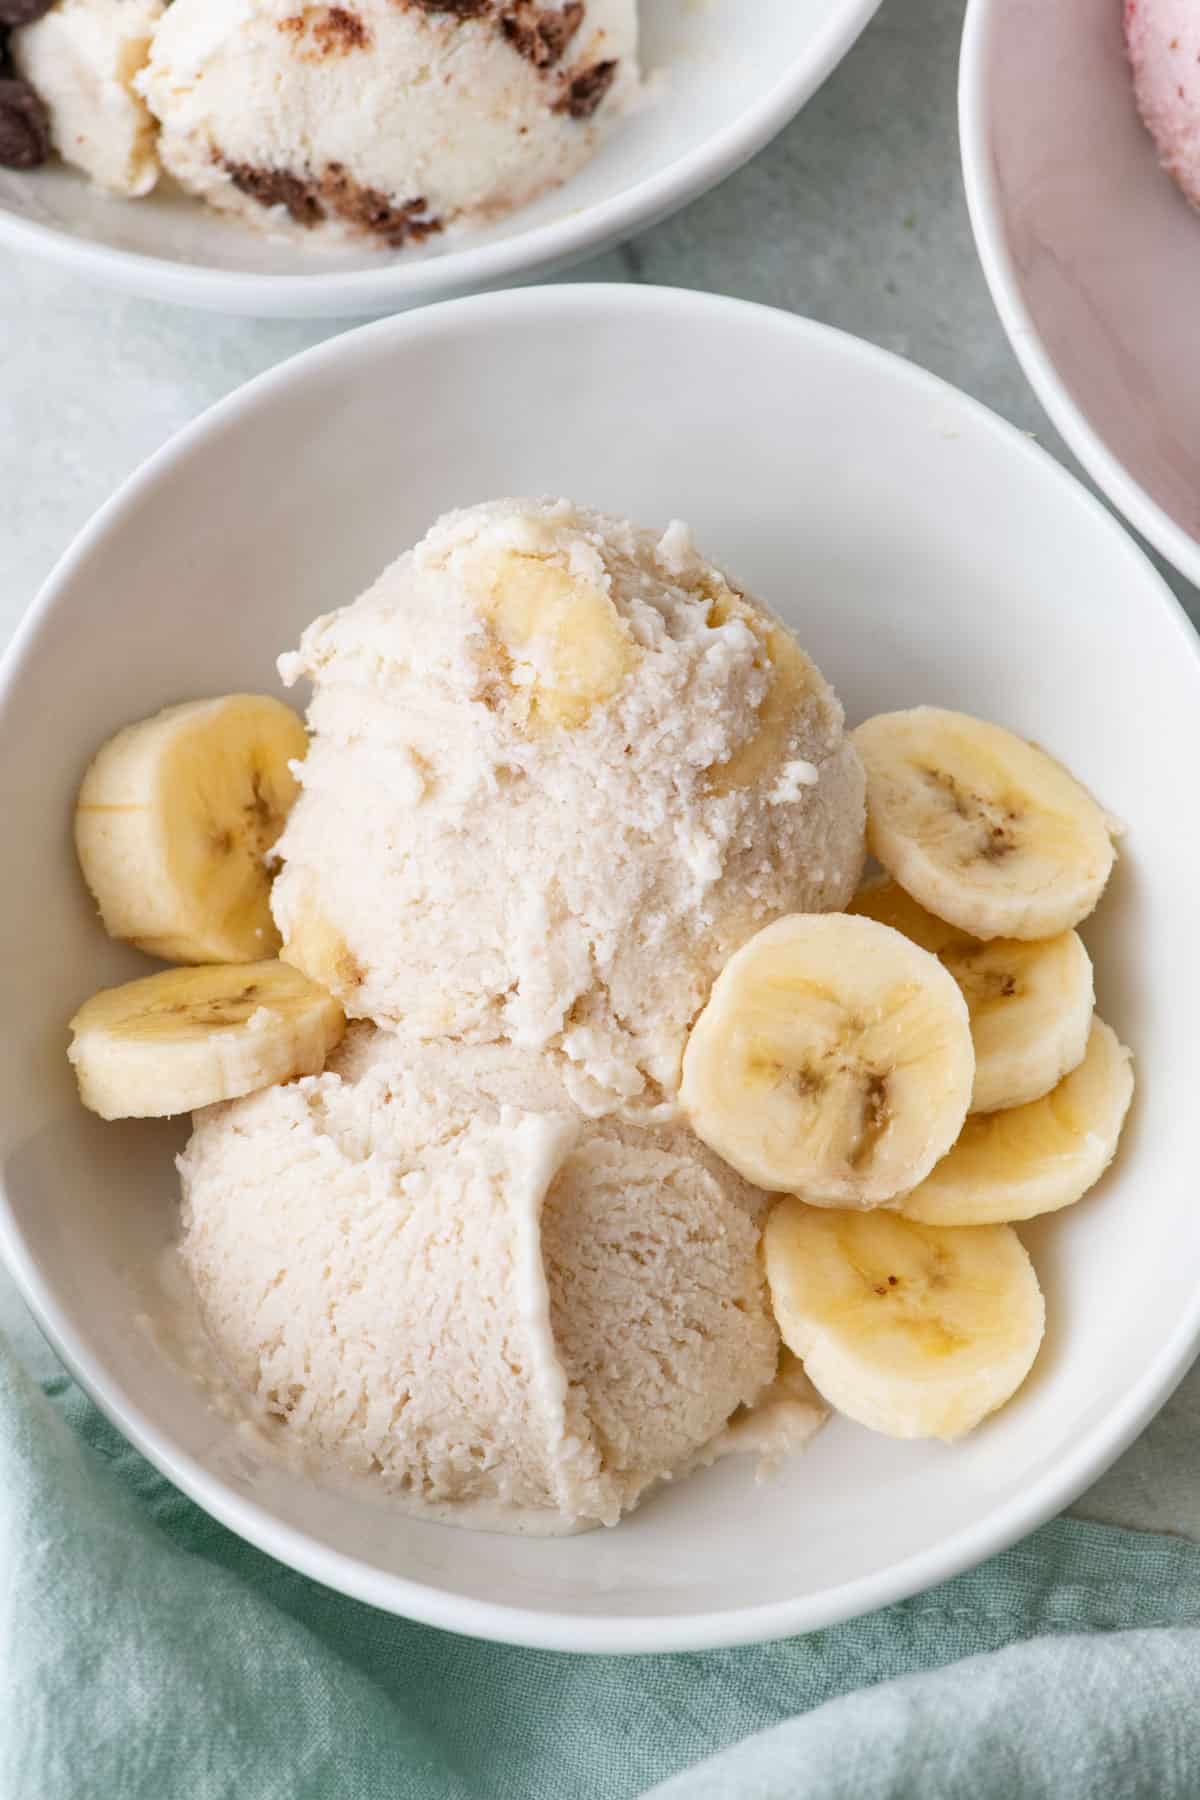 Banana cream cottage cheese ice cream with extra slices of banana on top.